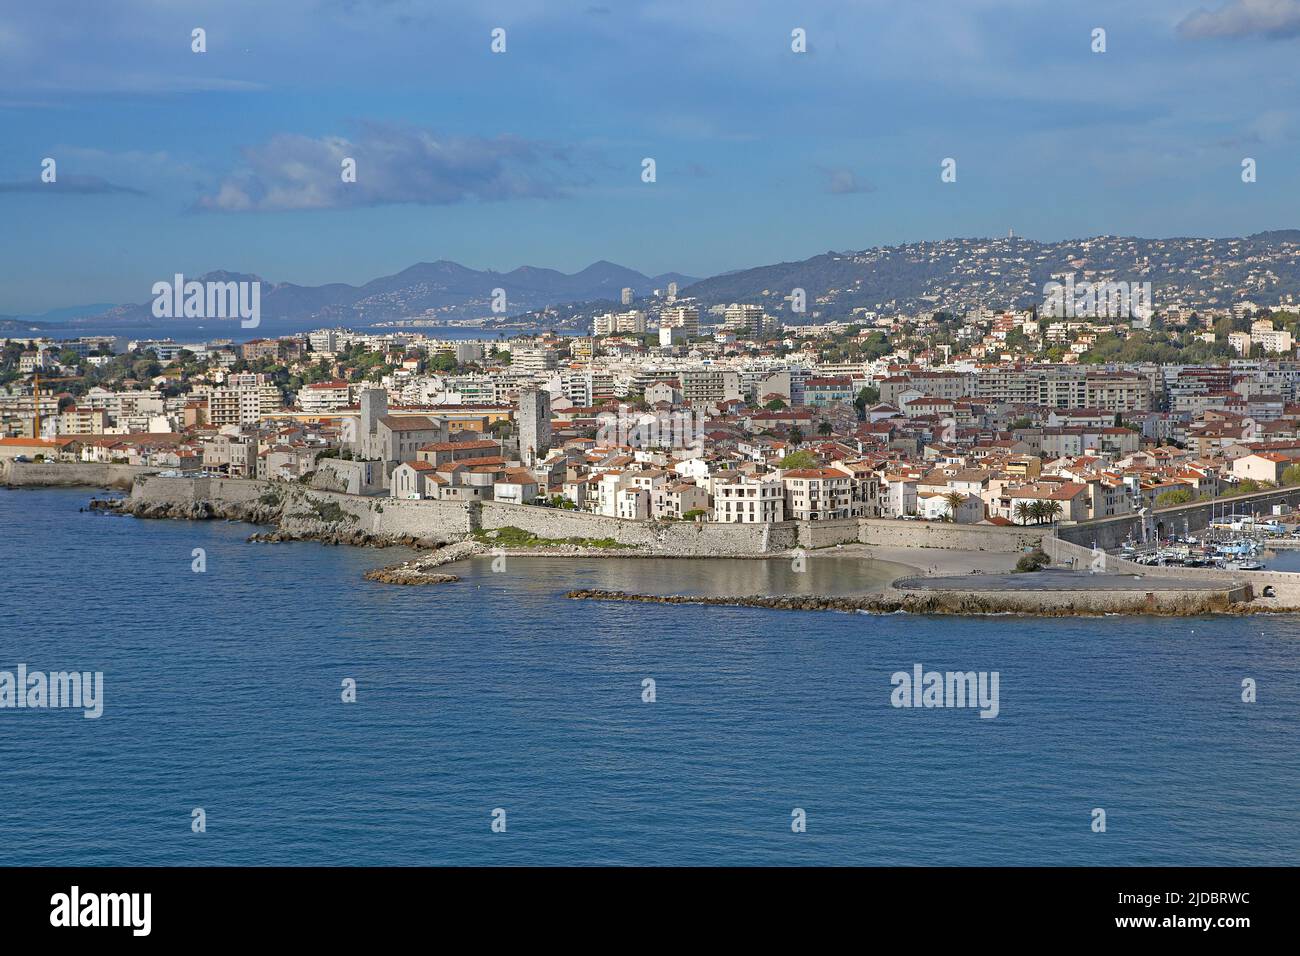 France, Alpes-Maritimes, Antibes, seaside town and fortified town of Antibes, view from the sea (aerial photo) Stock Photo